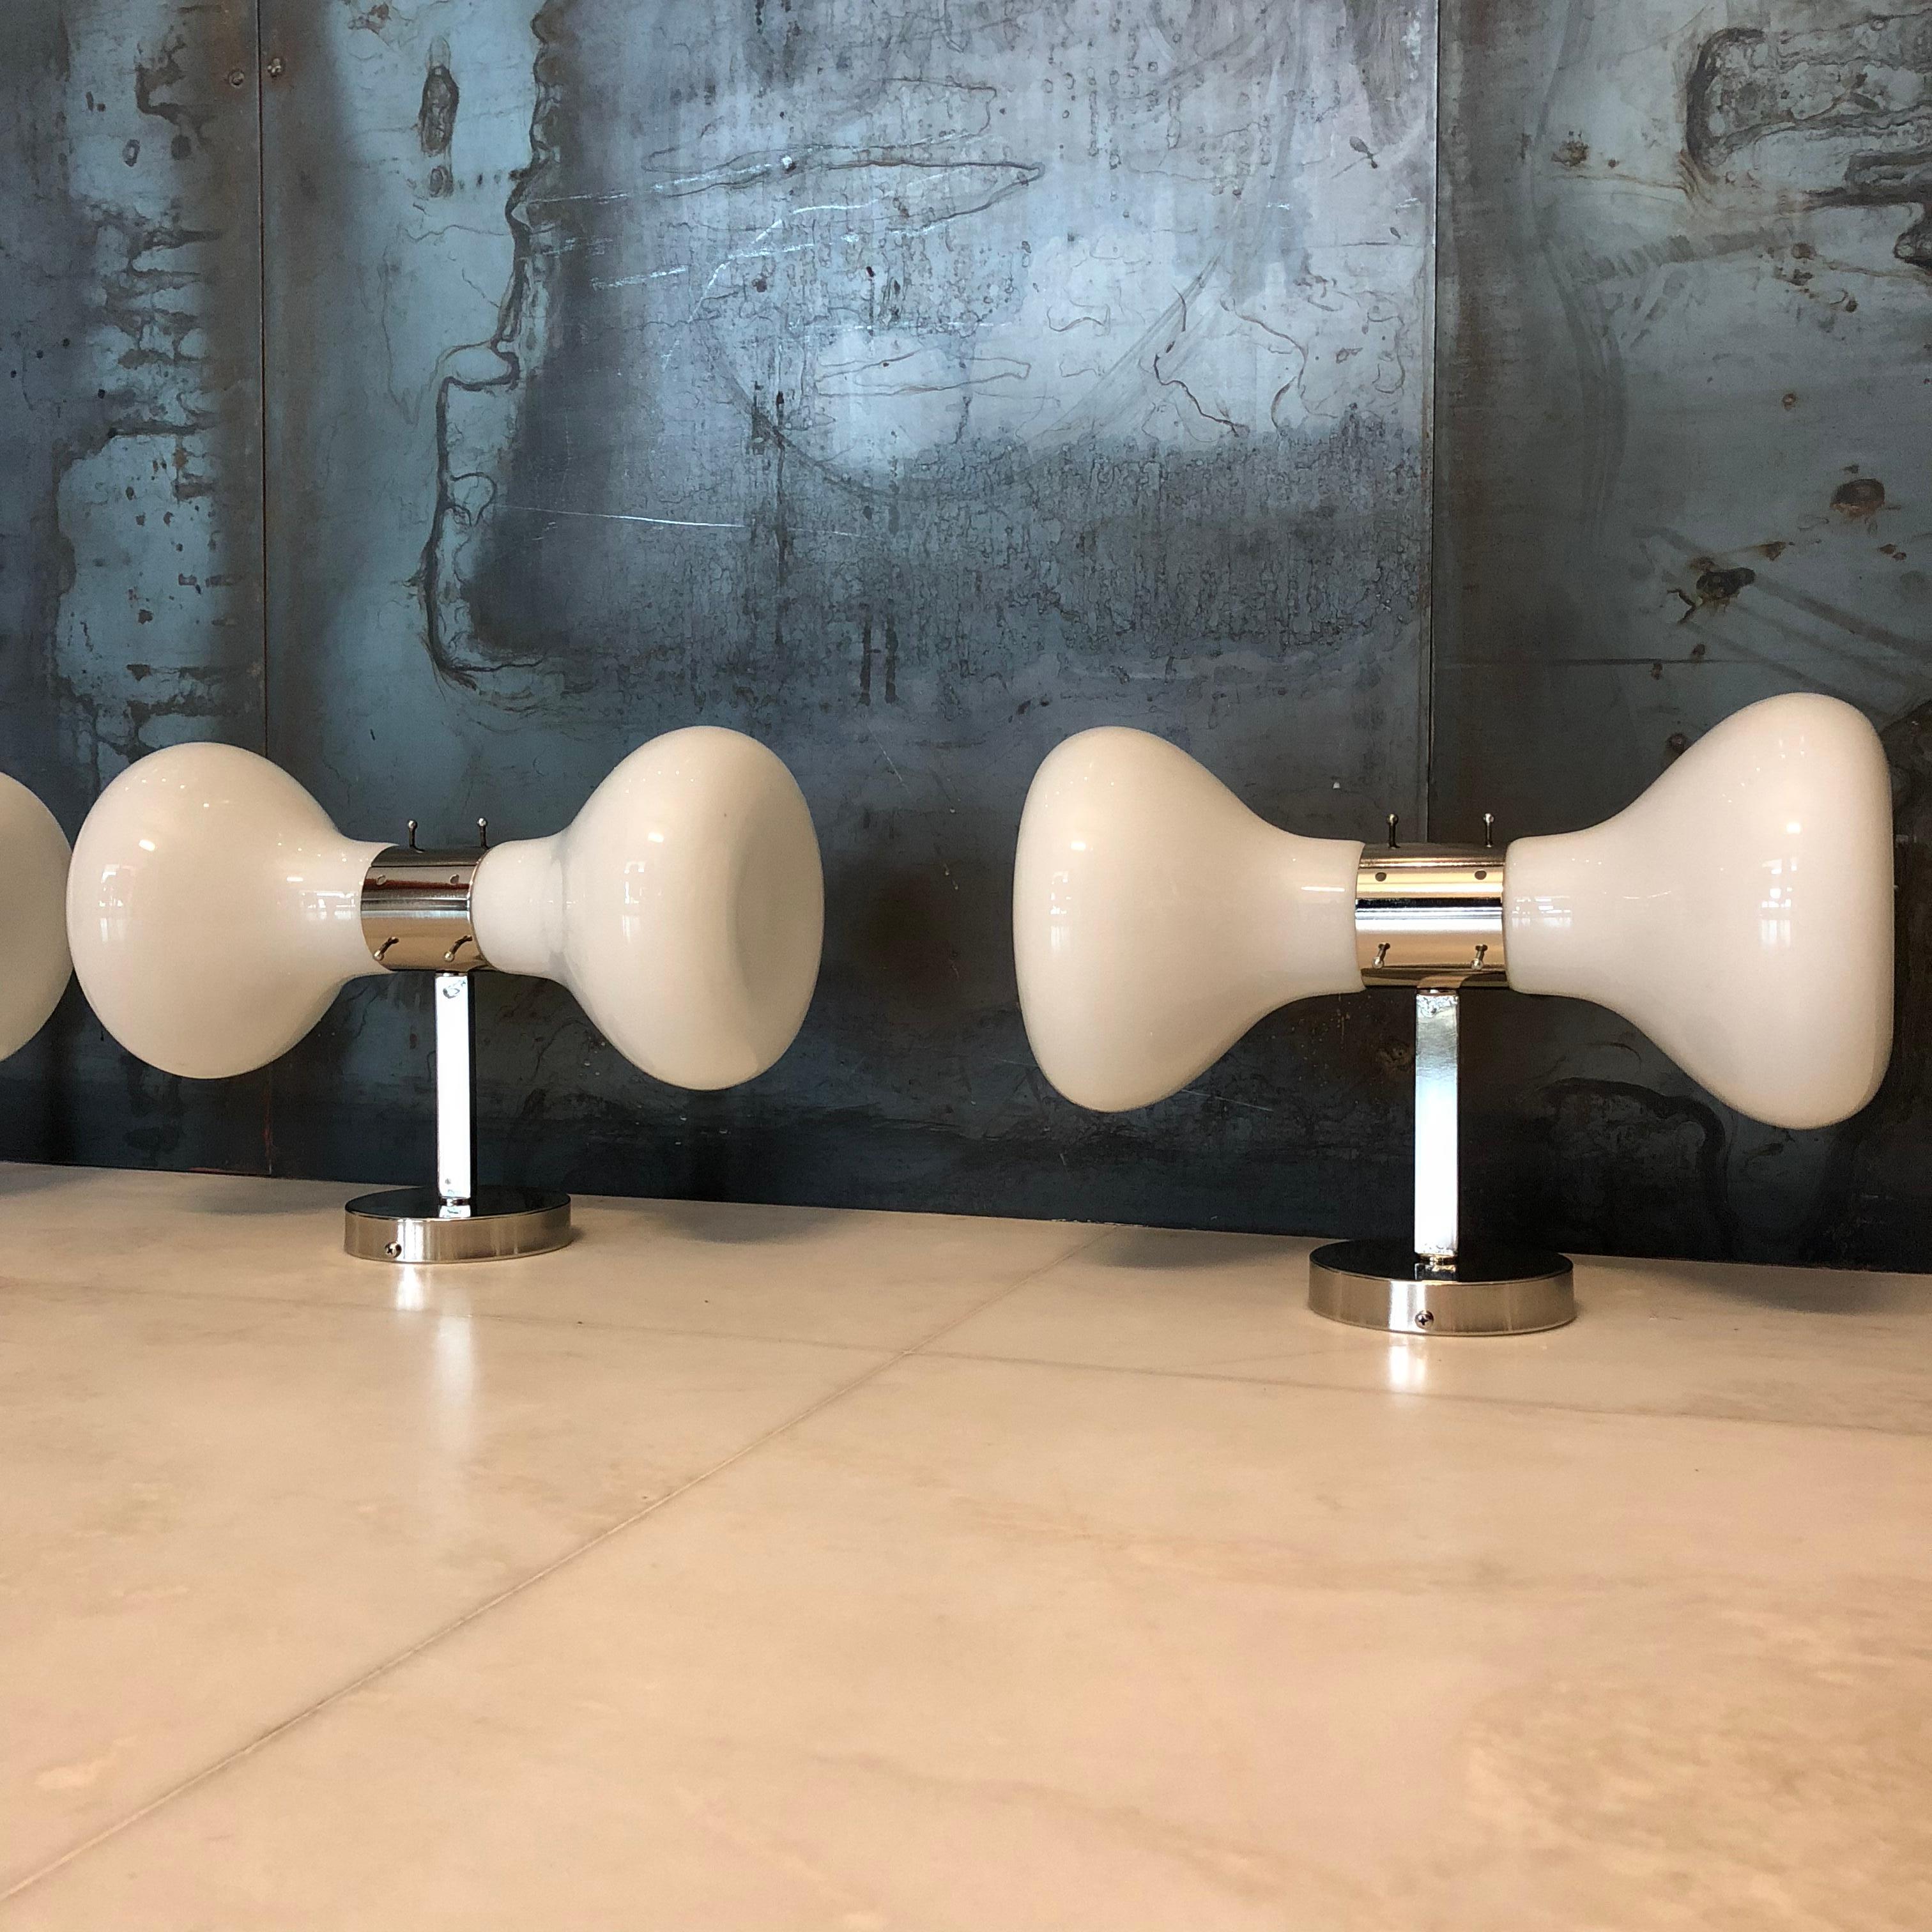 Set of five sconces designed by Aldo Nason and produced by Mazzega in the 1970s. Features nickelled brass frames and white Murano glass diffusers. Each sconce is fitted with two sockets for E14 bulbs.